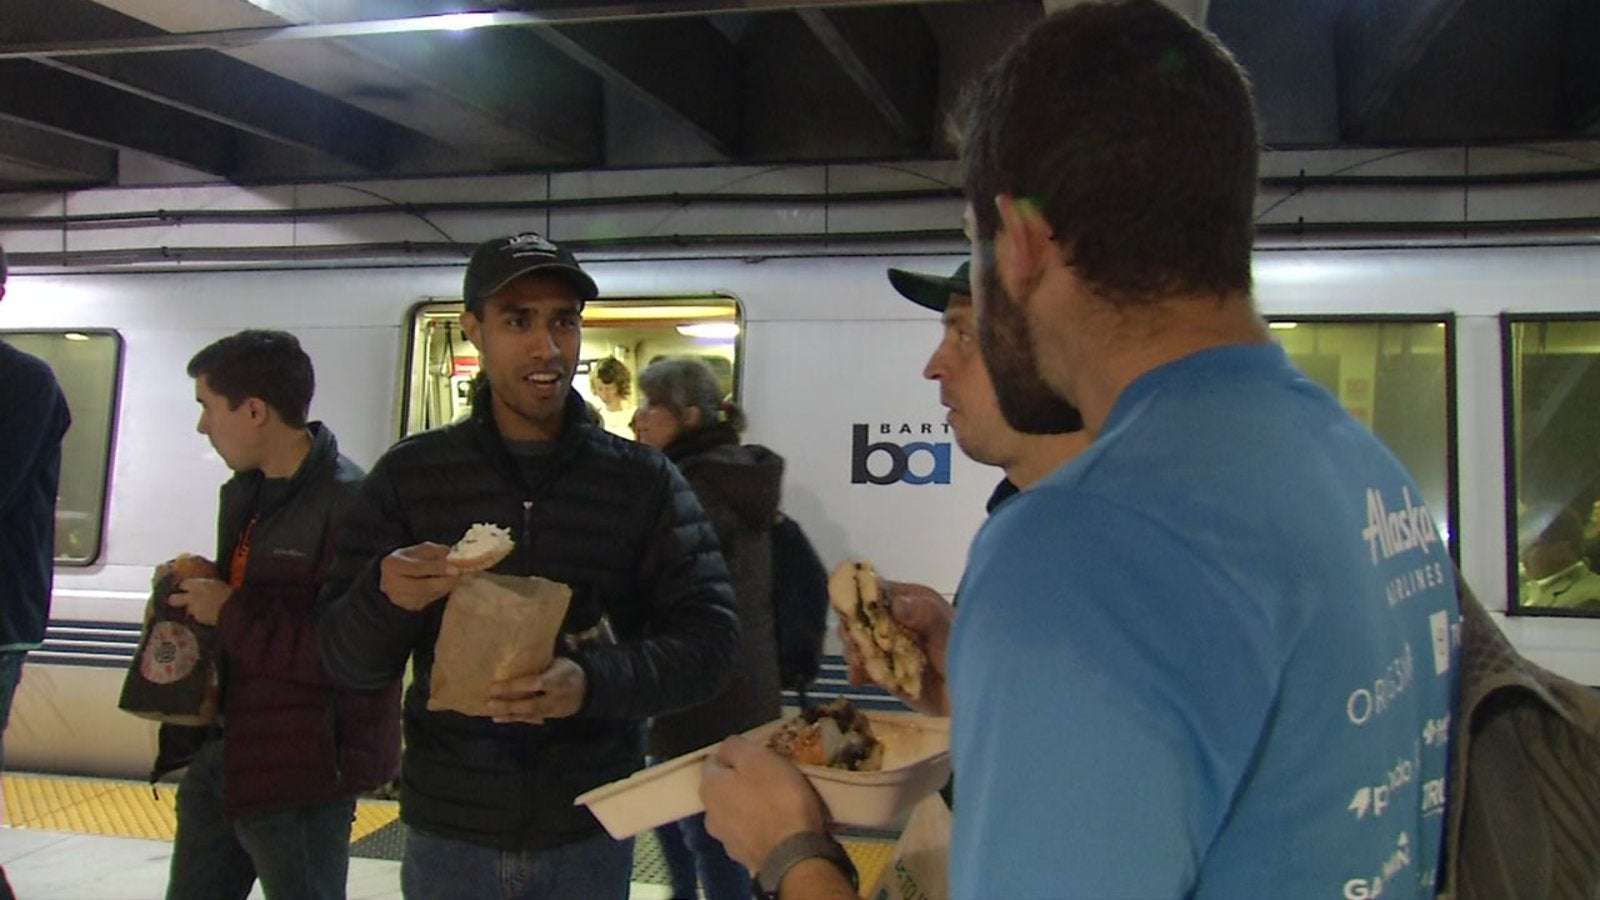 image for BART riders hold lunchtime 'eat-in' protest after man detained for eating sandwich on platform